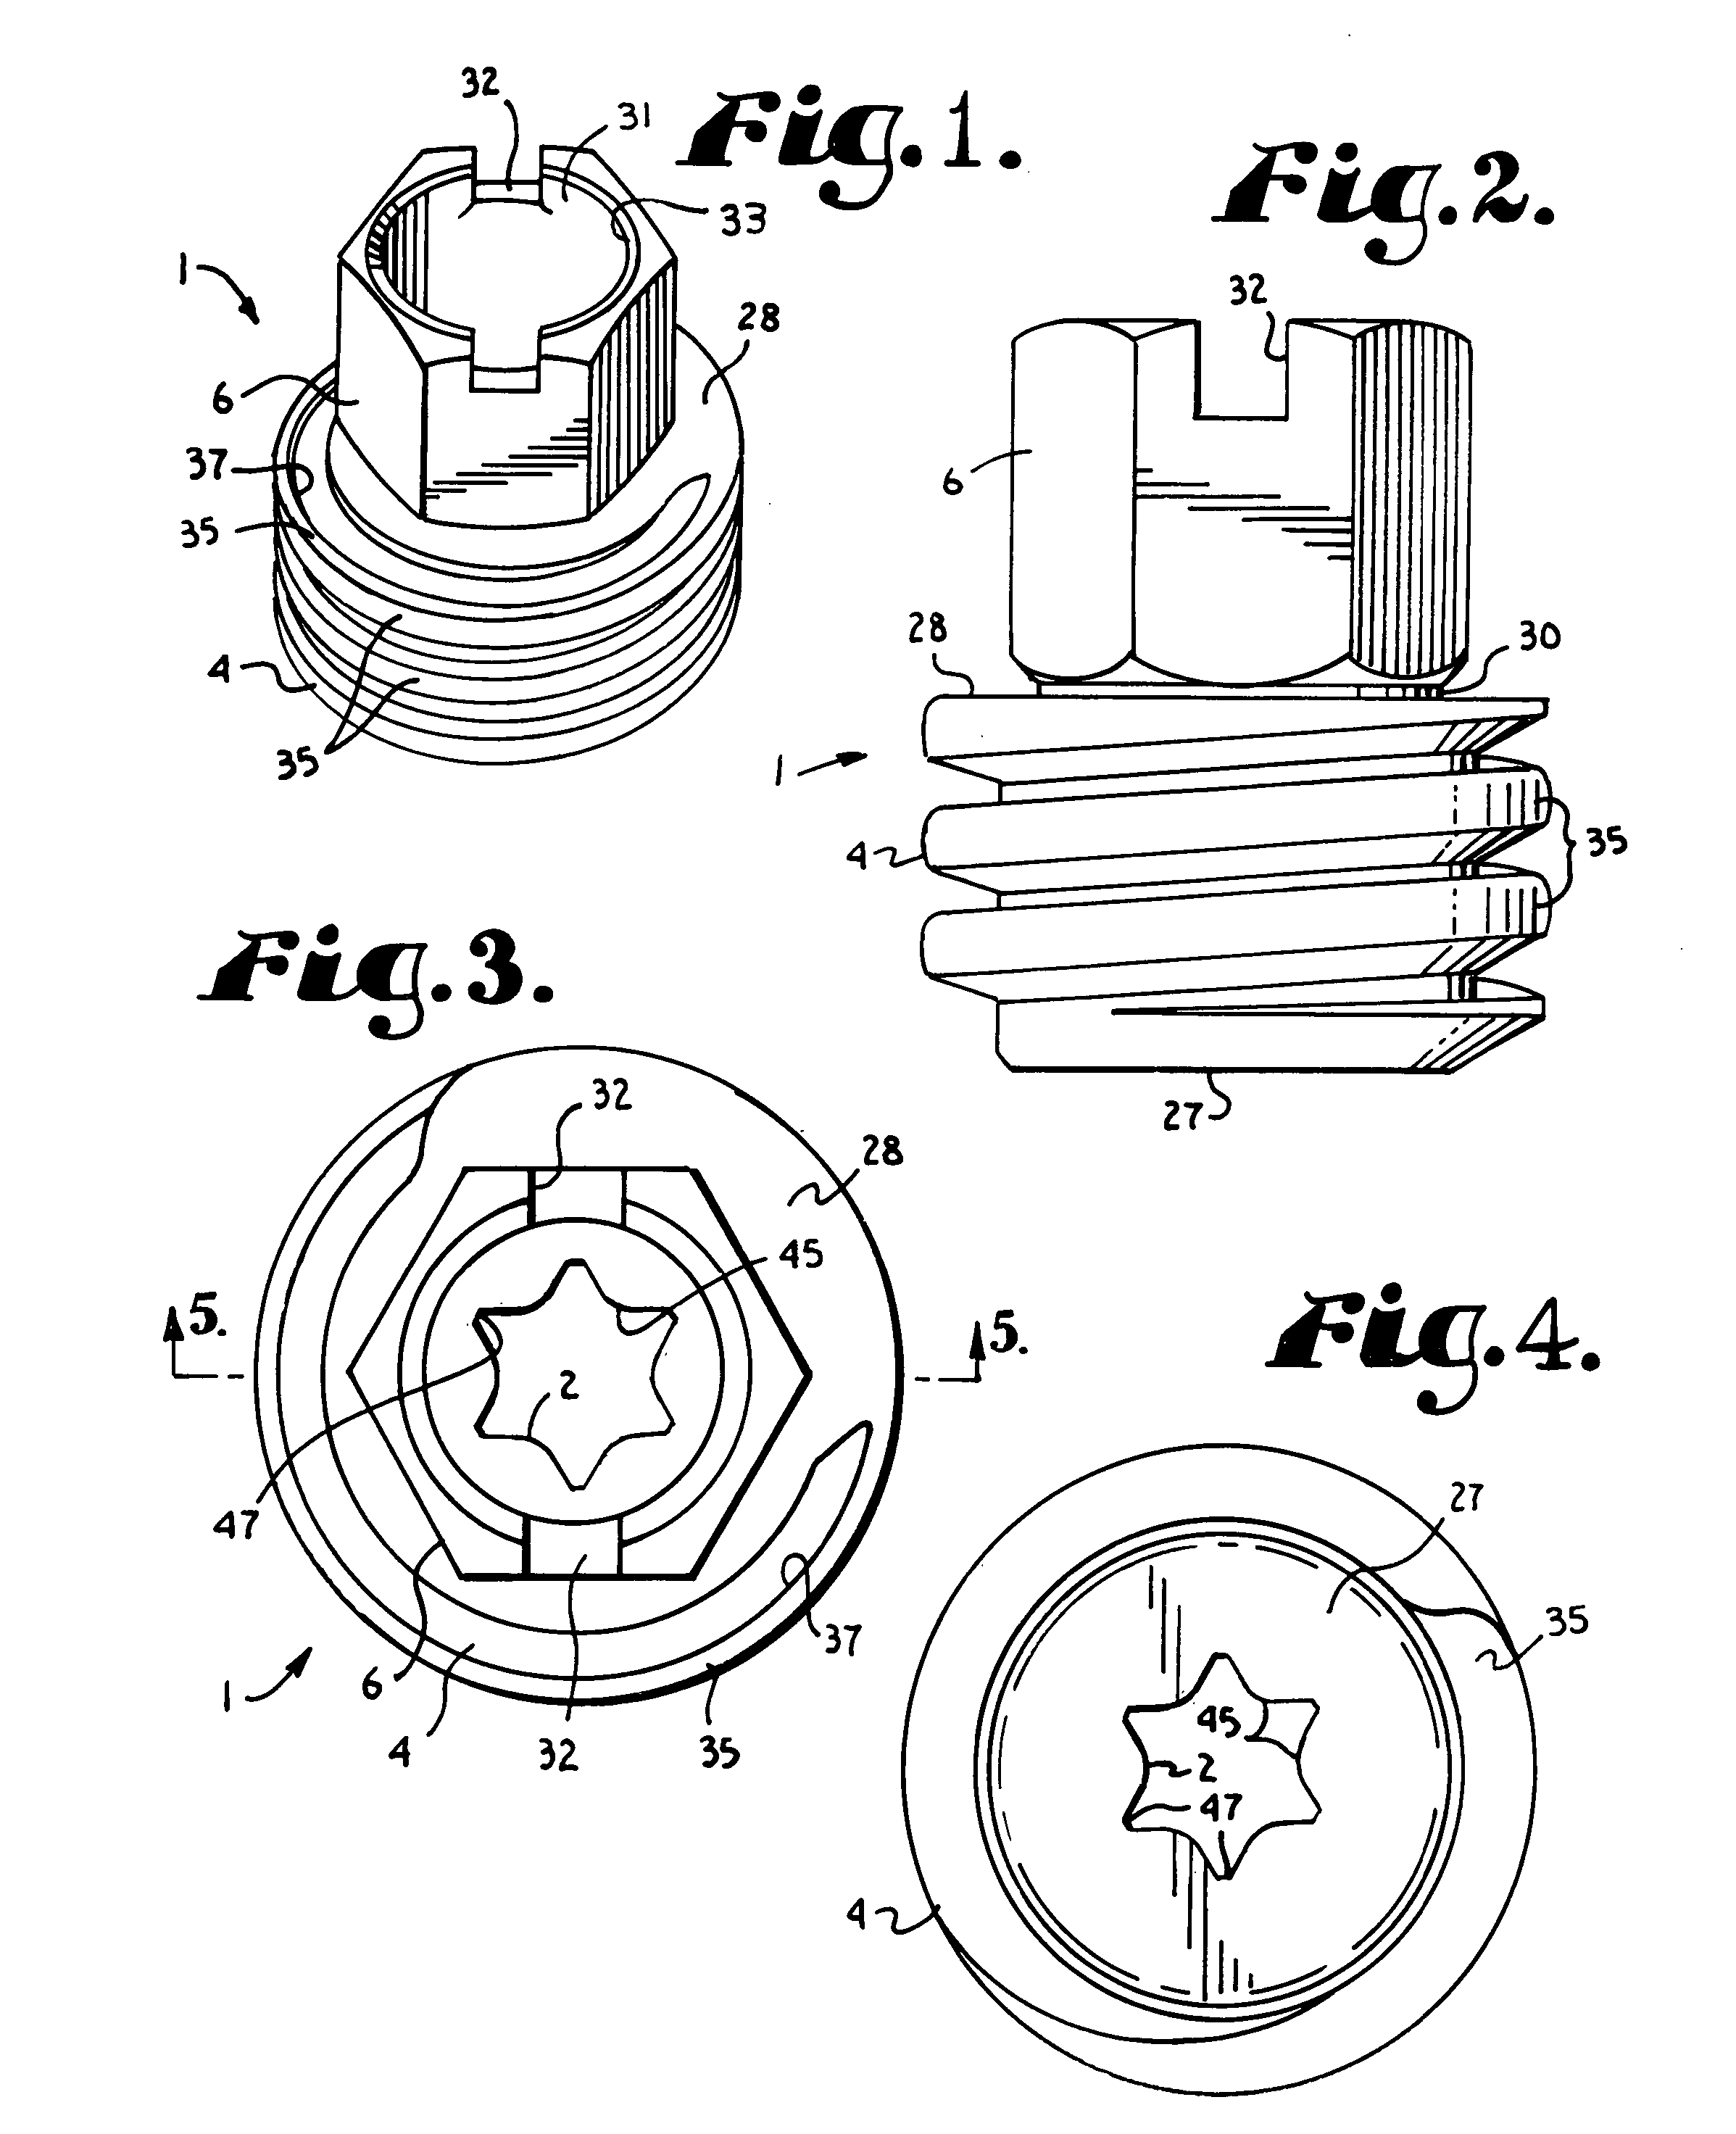 Anti-splay medical implant closure with multi-surface removal aperture